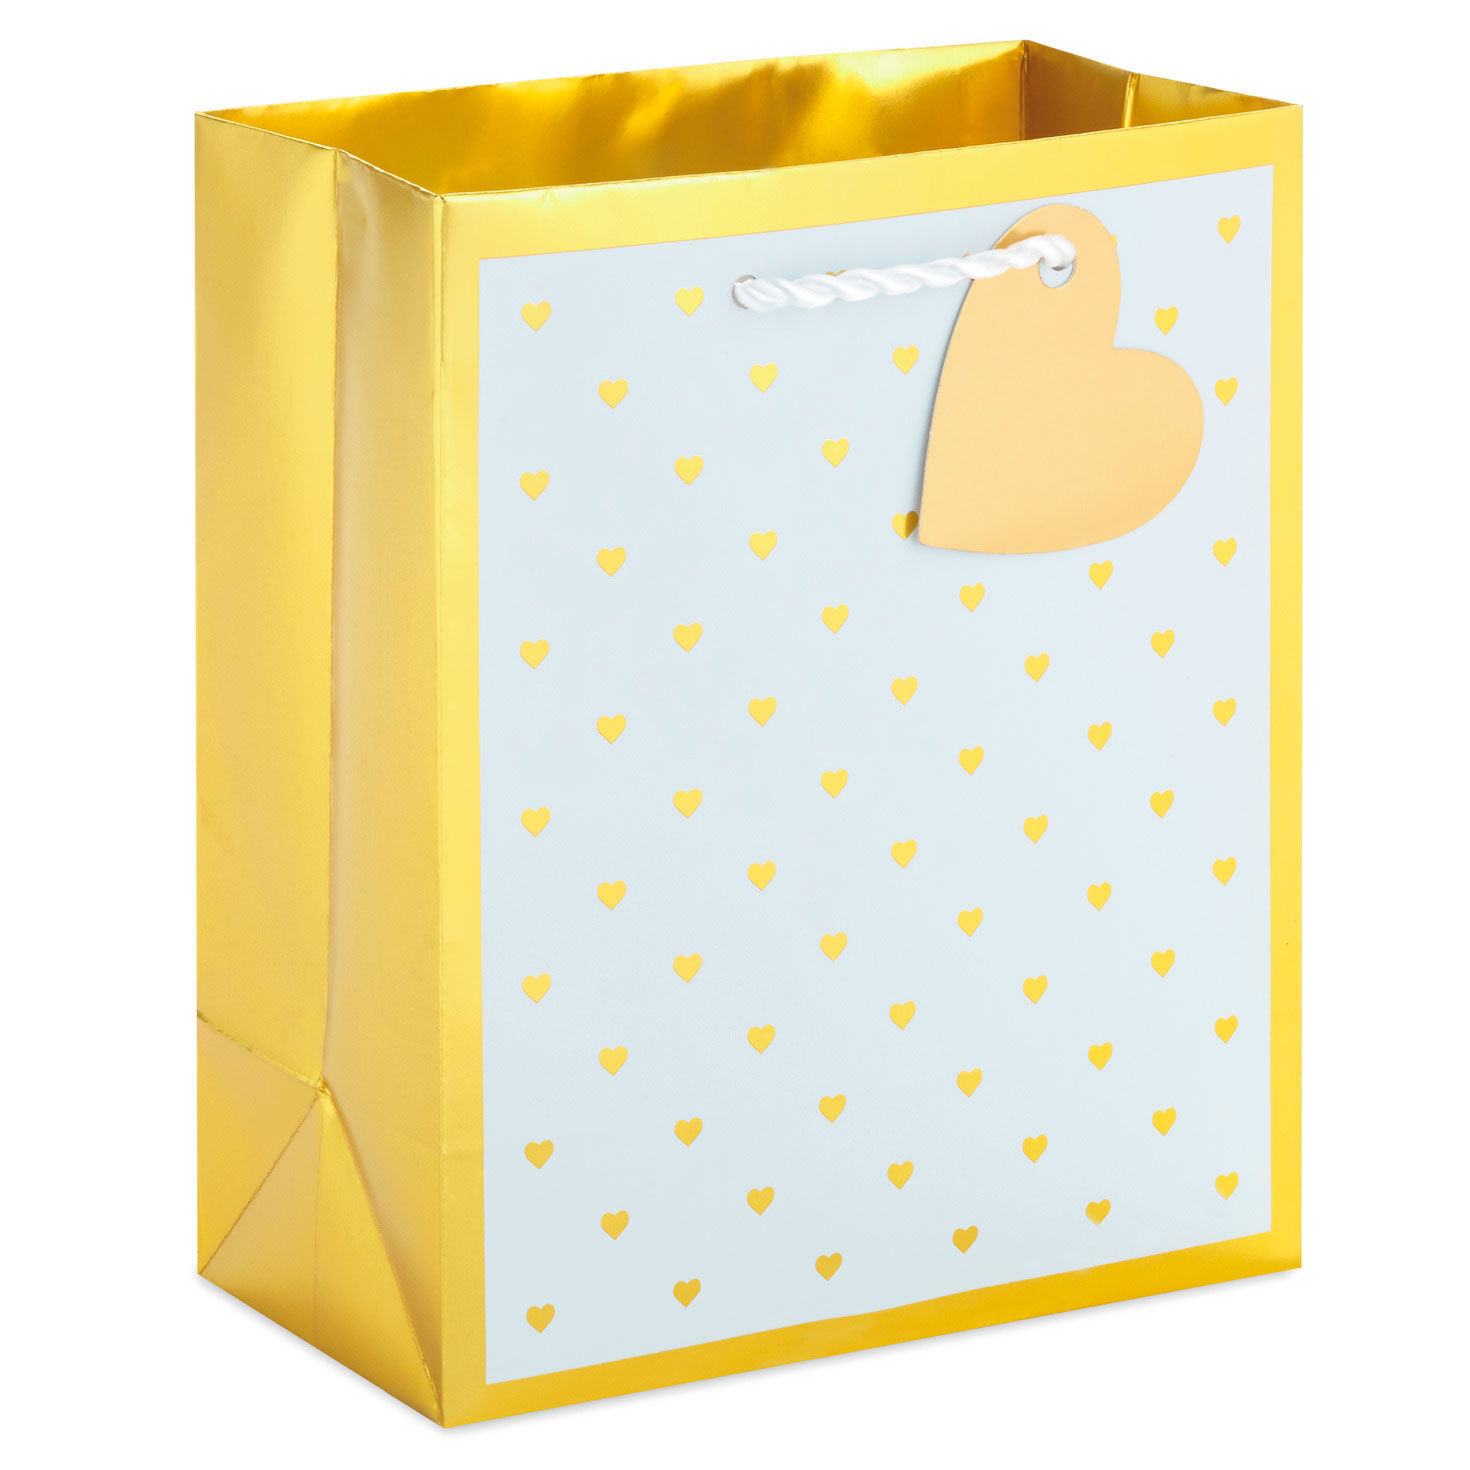 Hallmark 56 Large Plastic Gift Bag (Gold Love, White Flowers) for Engagement Parties, Bridal Showers, Weddings, Valentines Day and More